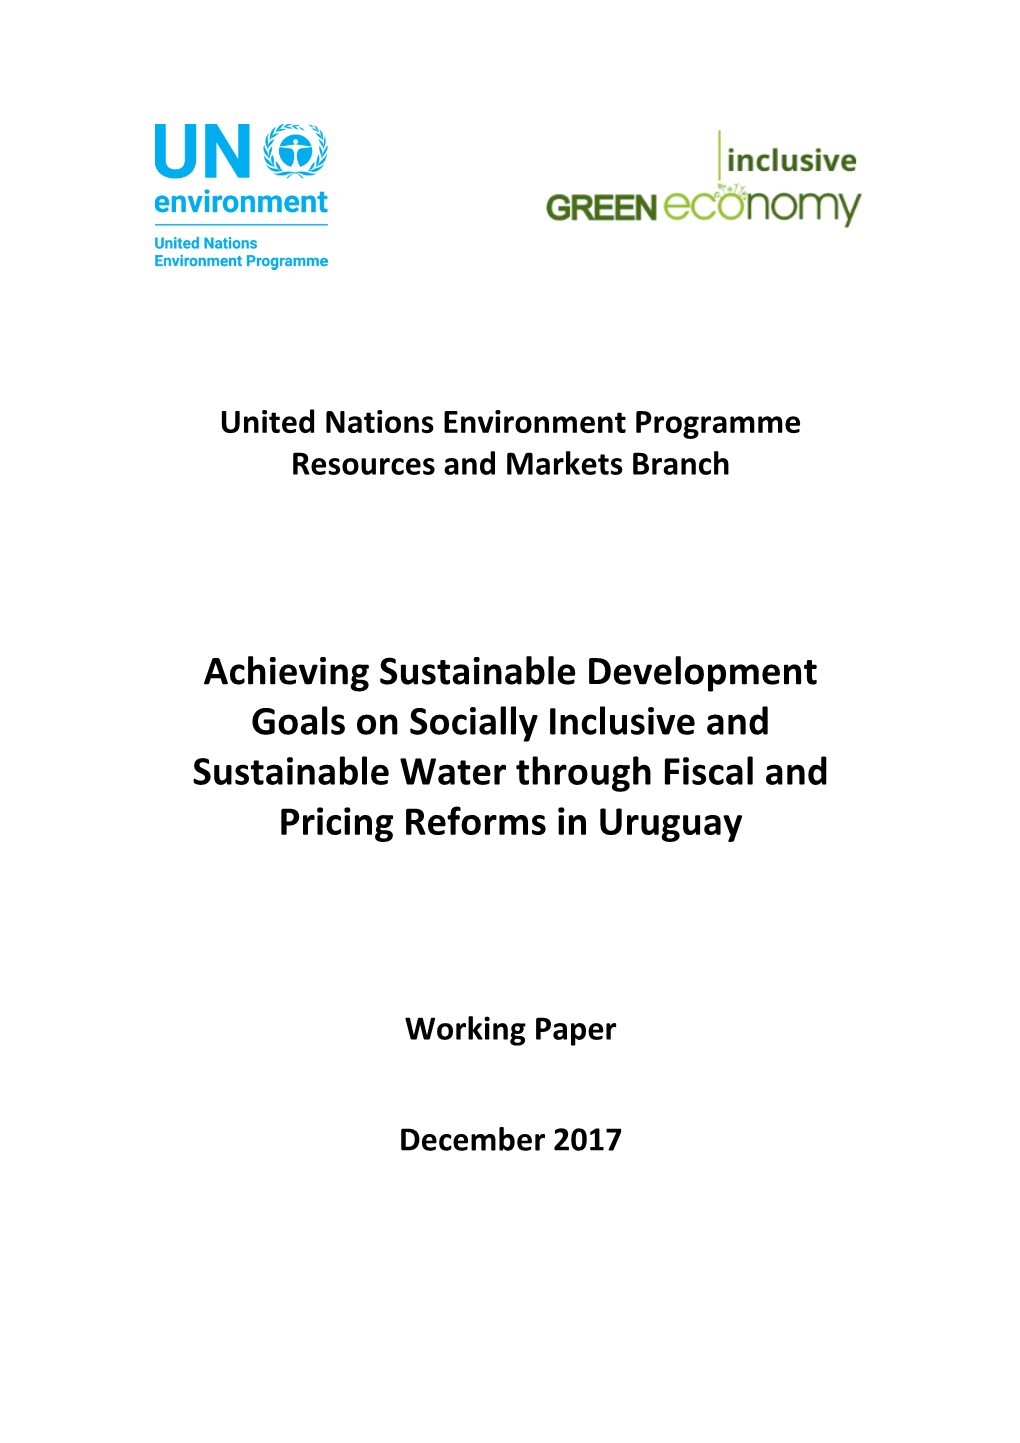 Achieving Sustainable Development Goals on Socially Inclusive and Sustainable Water Through Fiscal and Pricing Reforms in Uruguay